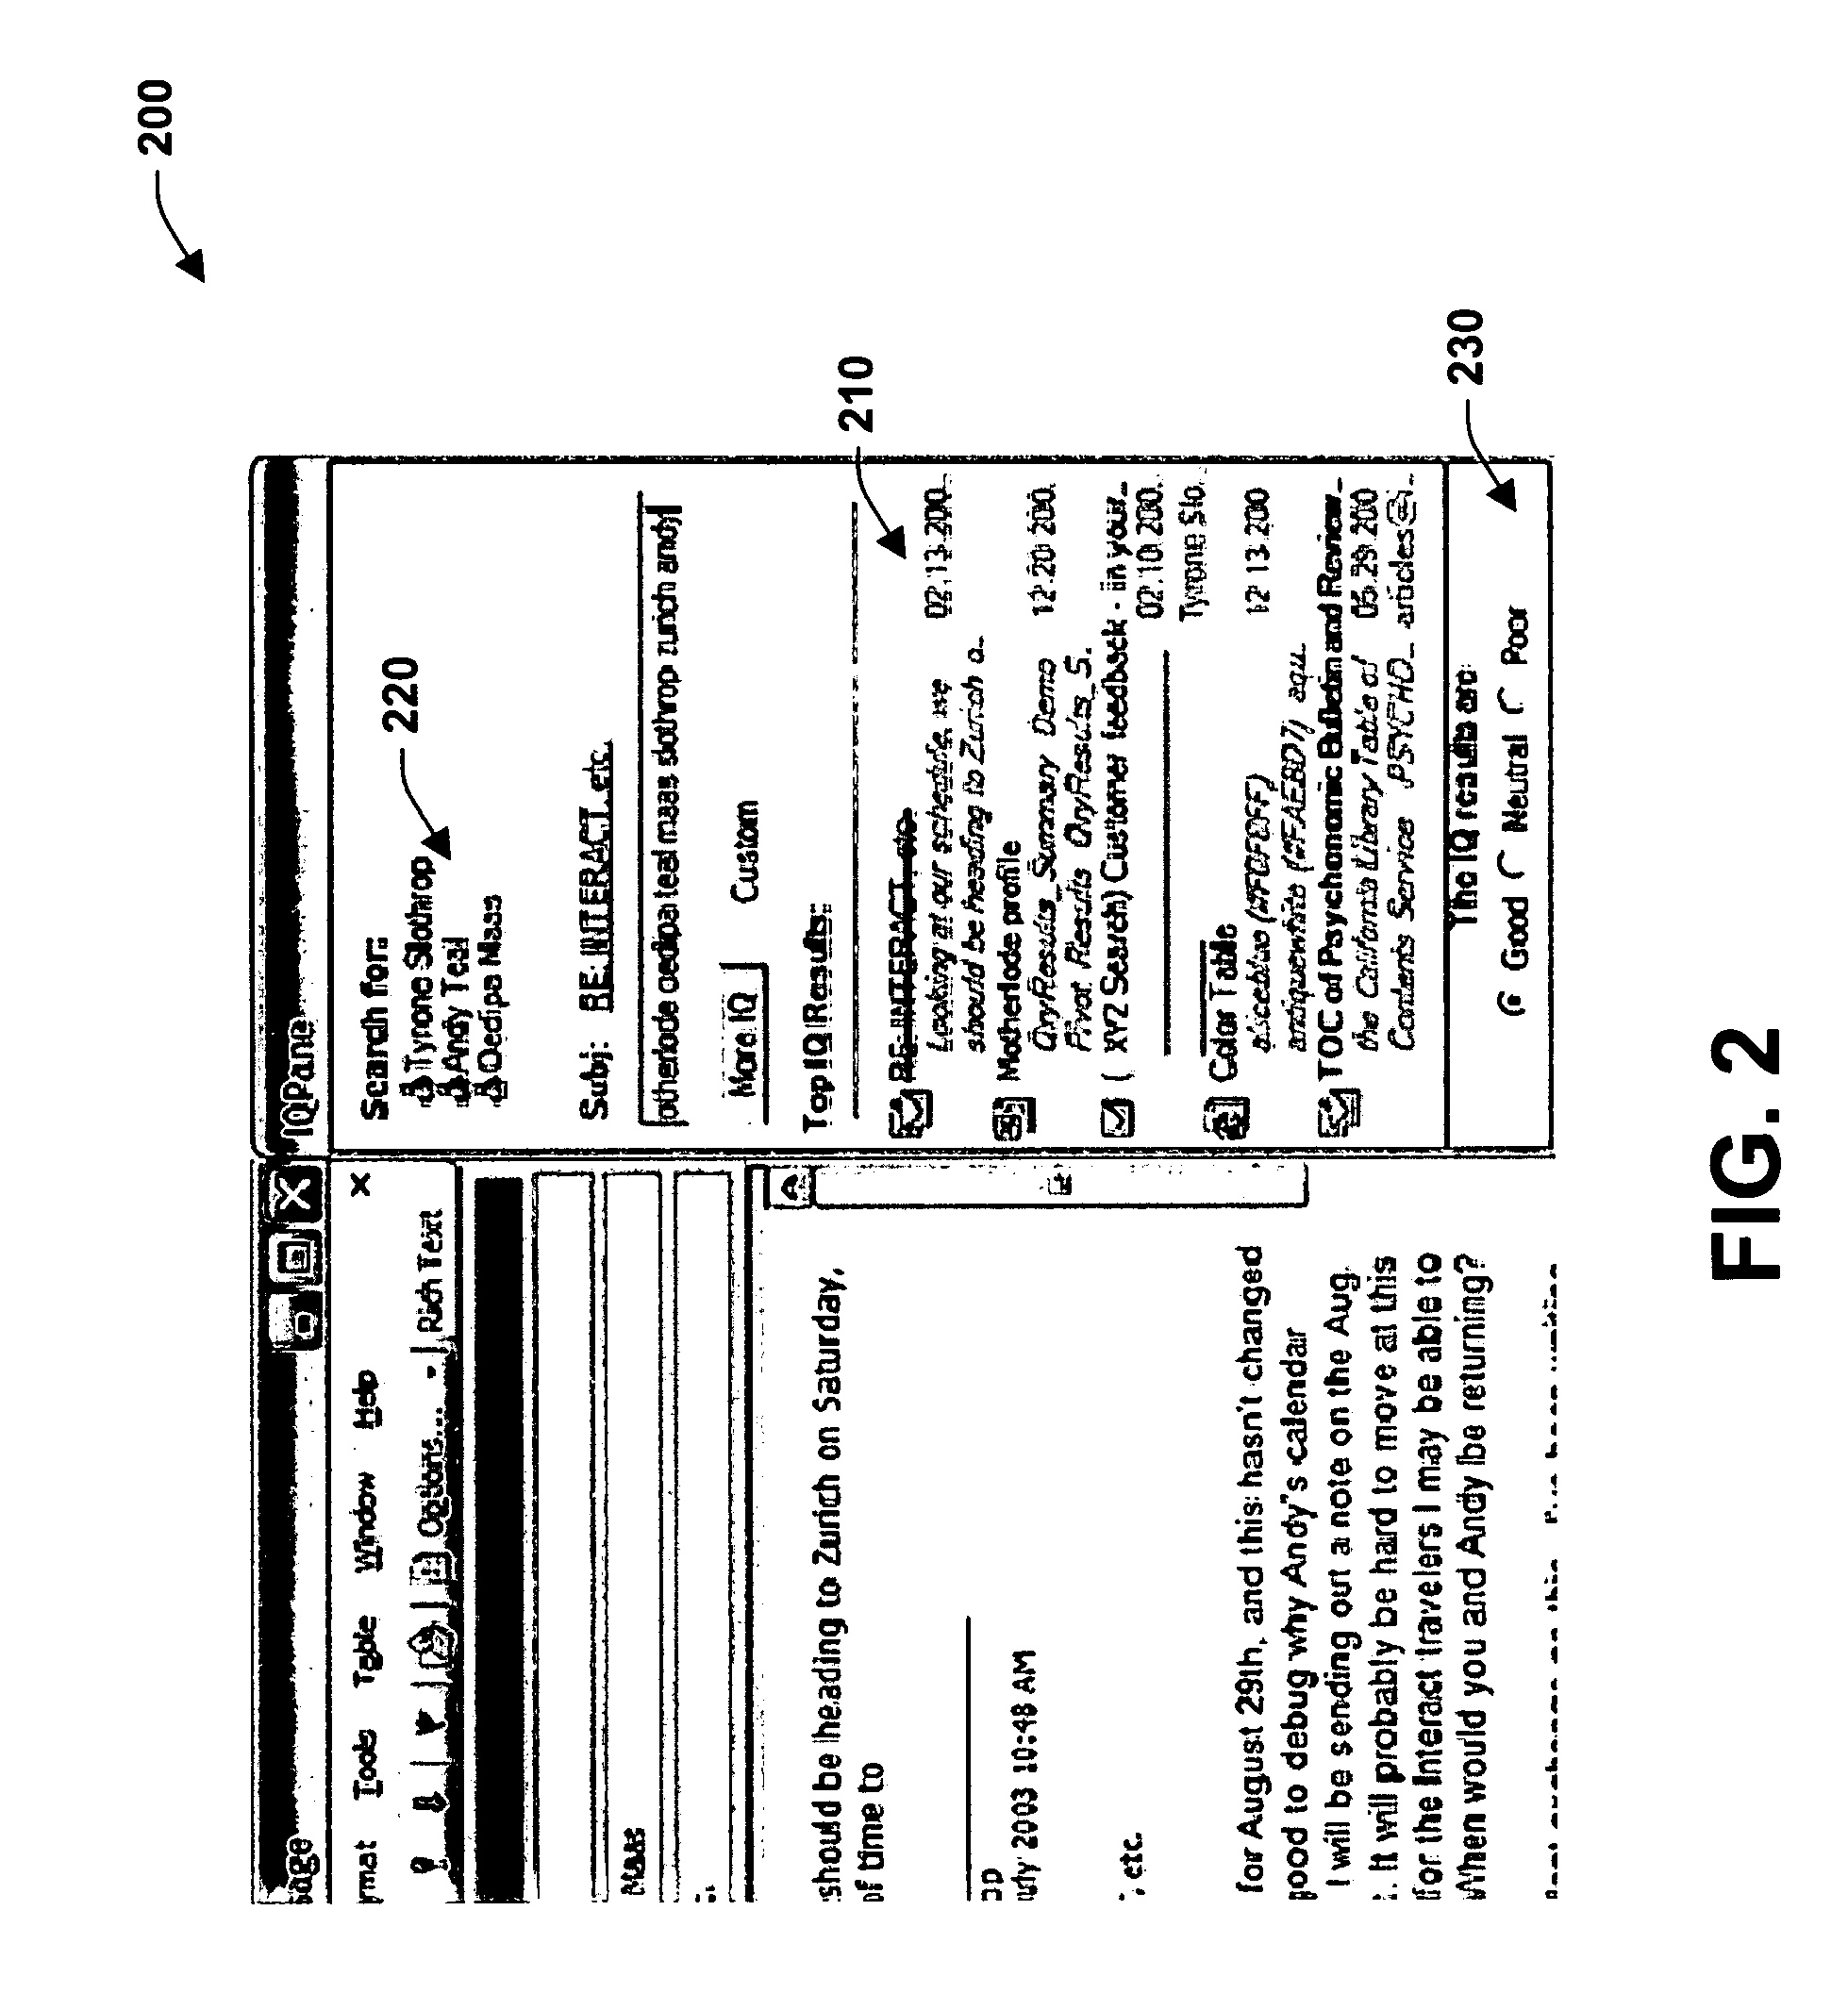 Systems and methods for performing background queries from content and activity